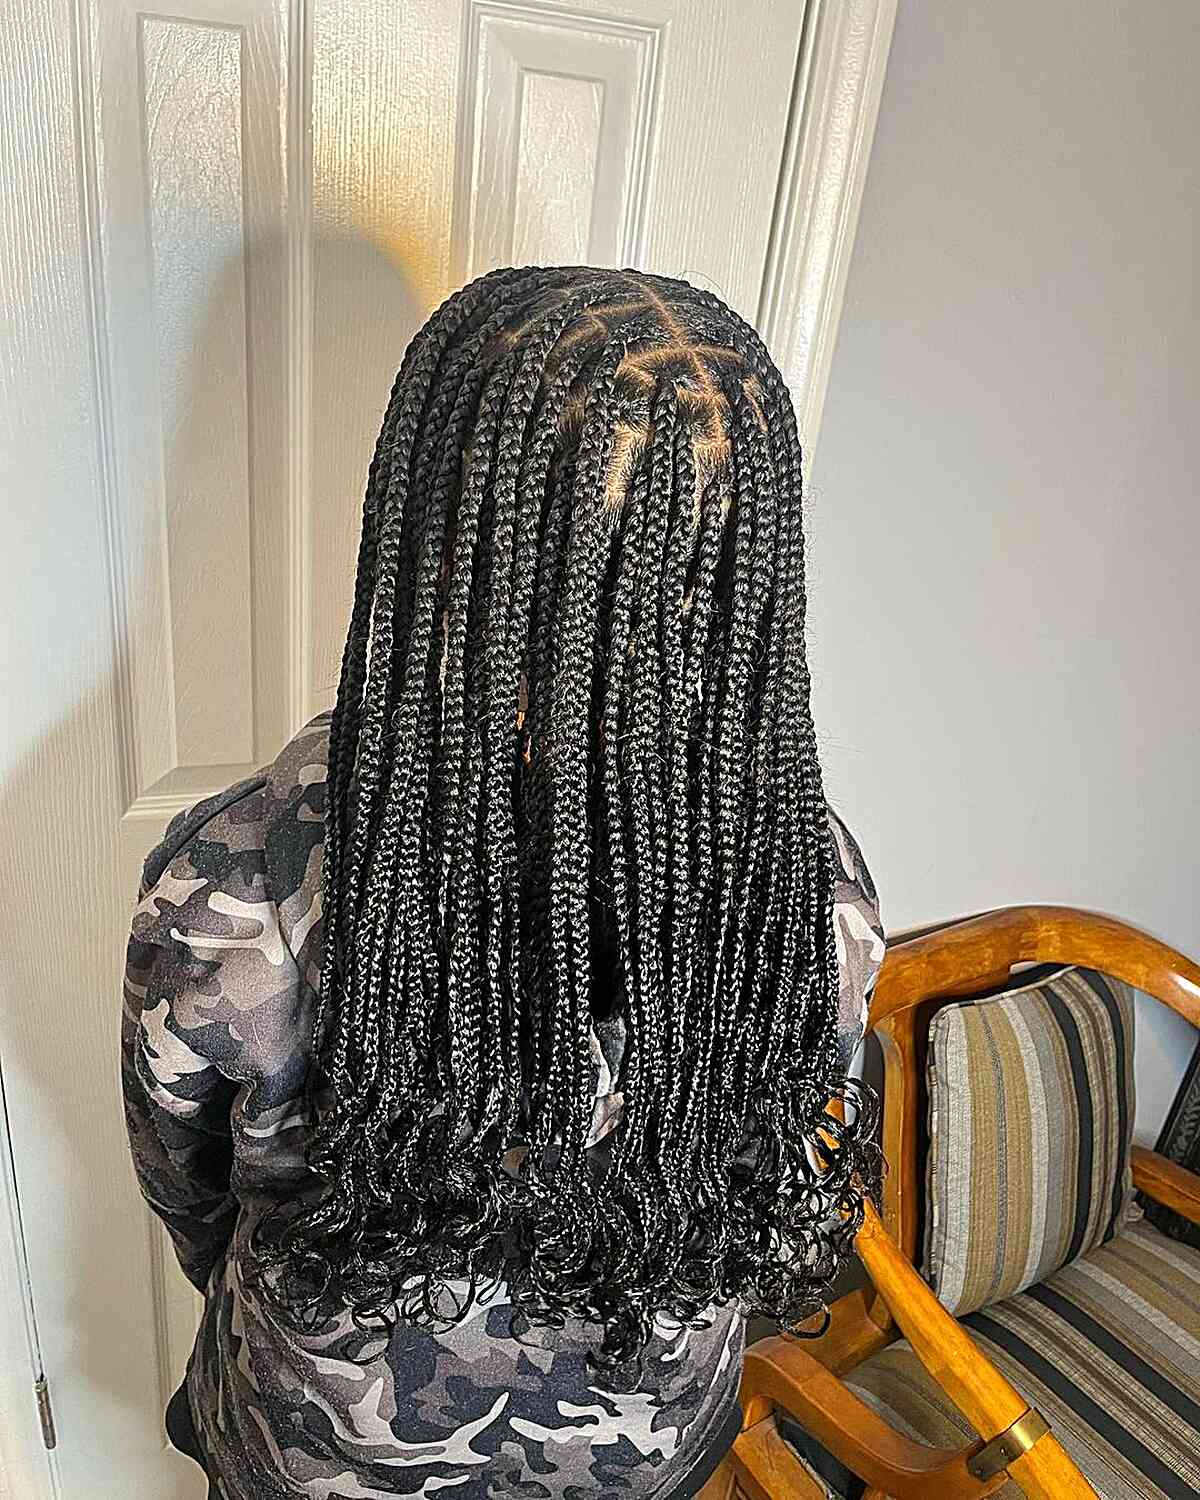 Medium Knotless Protective Braids with Curly Ends on Black Hair